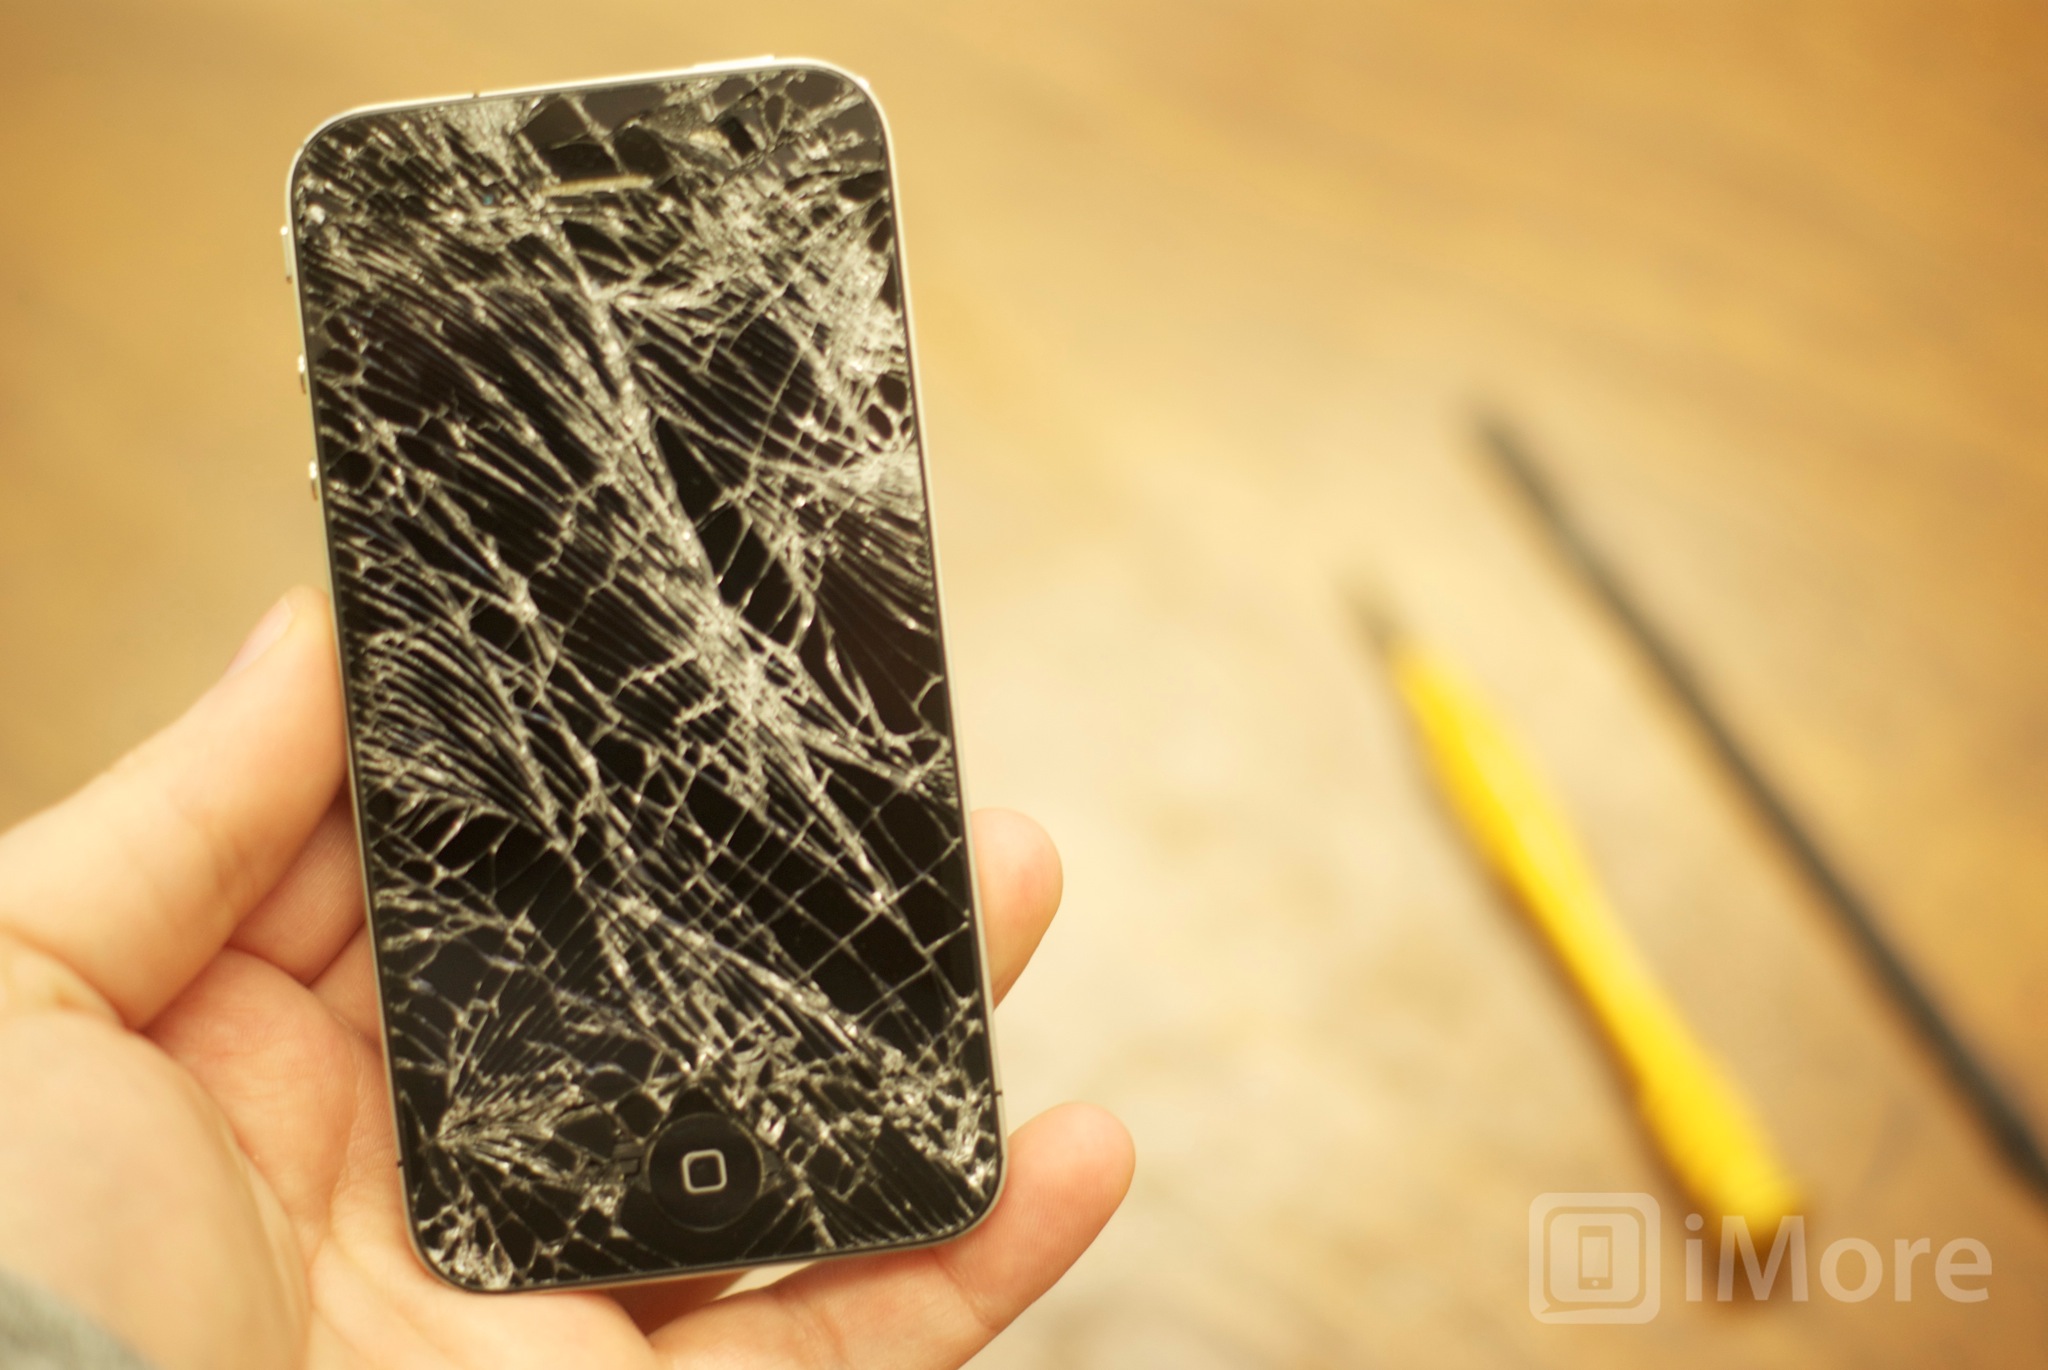 Weekly Mod How To Diy Repair A Broken Screen On An At T Gsm iPhone